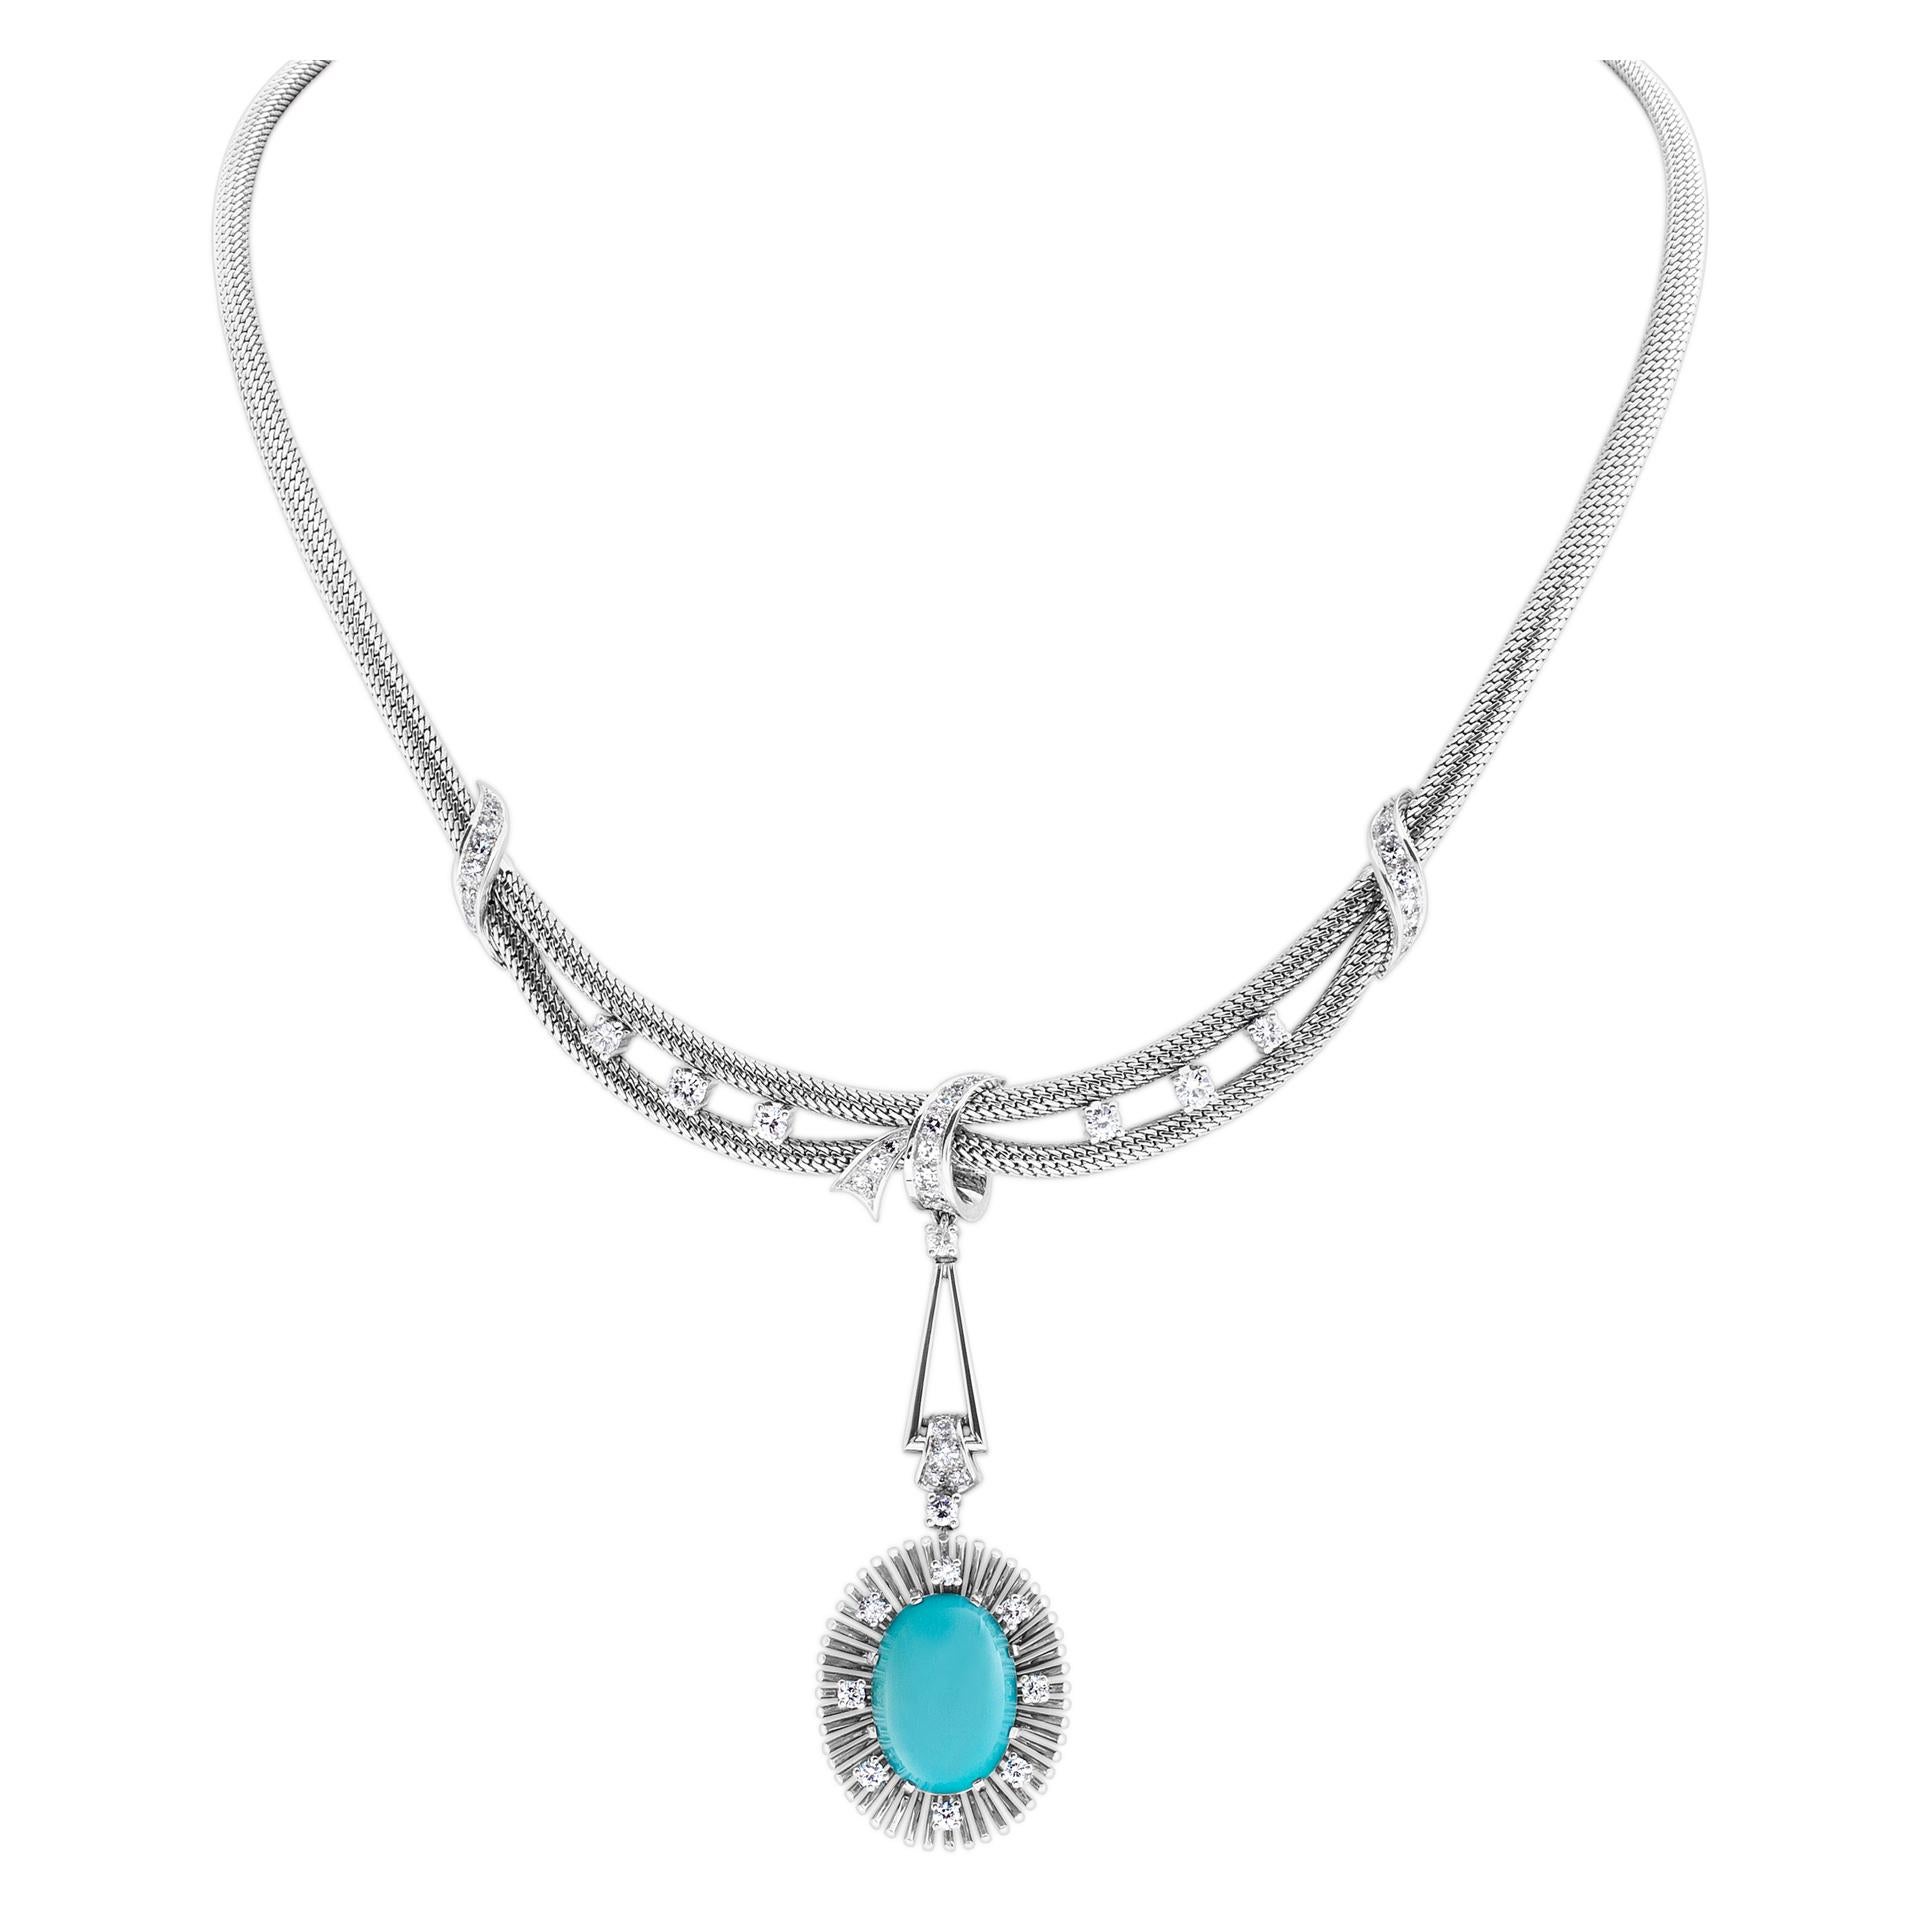 Women's Turquoise and Diamond Necklace and Earrings Set in 18 Karat White Gold